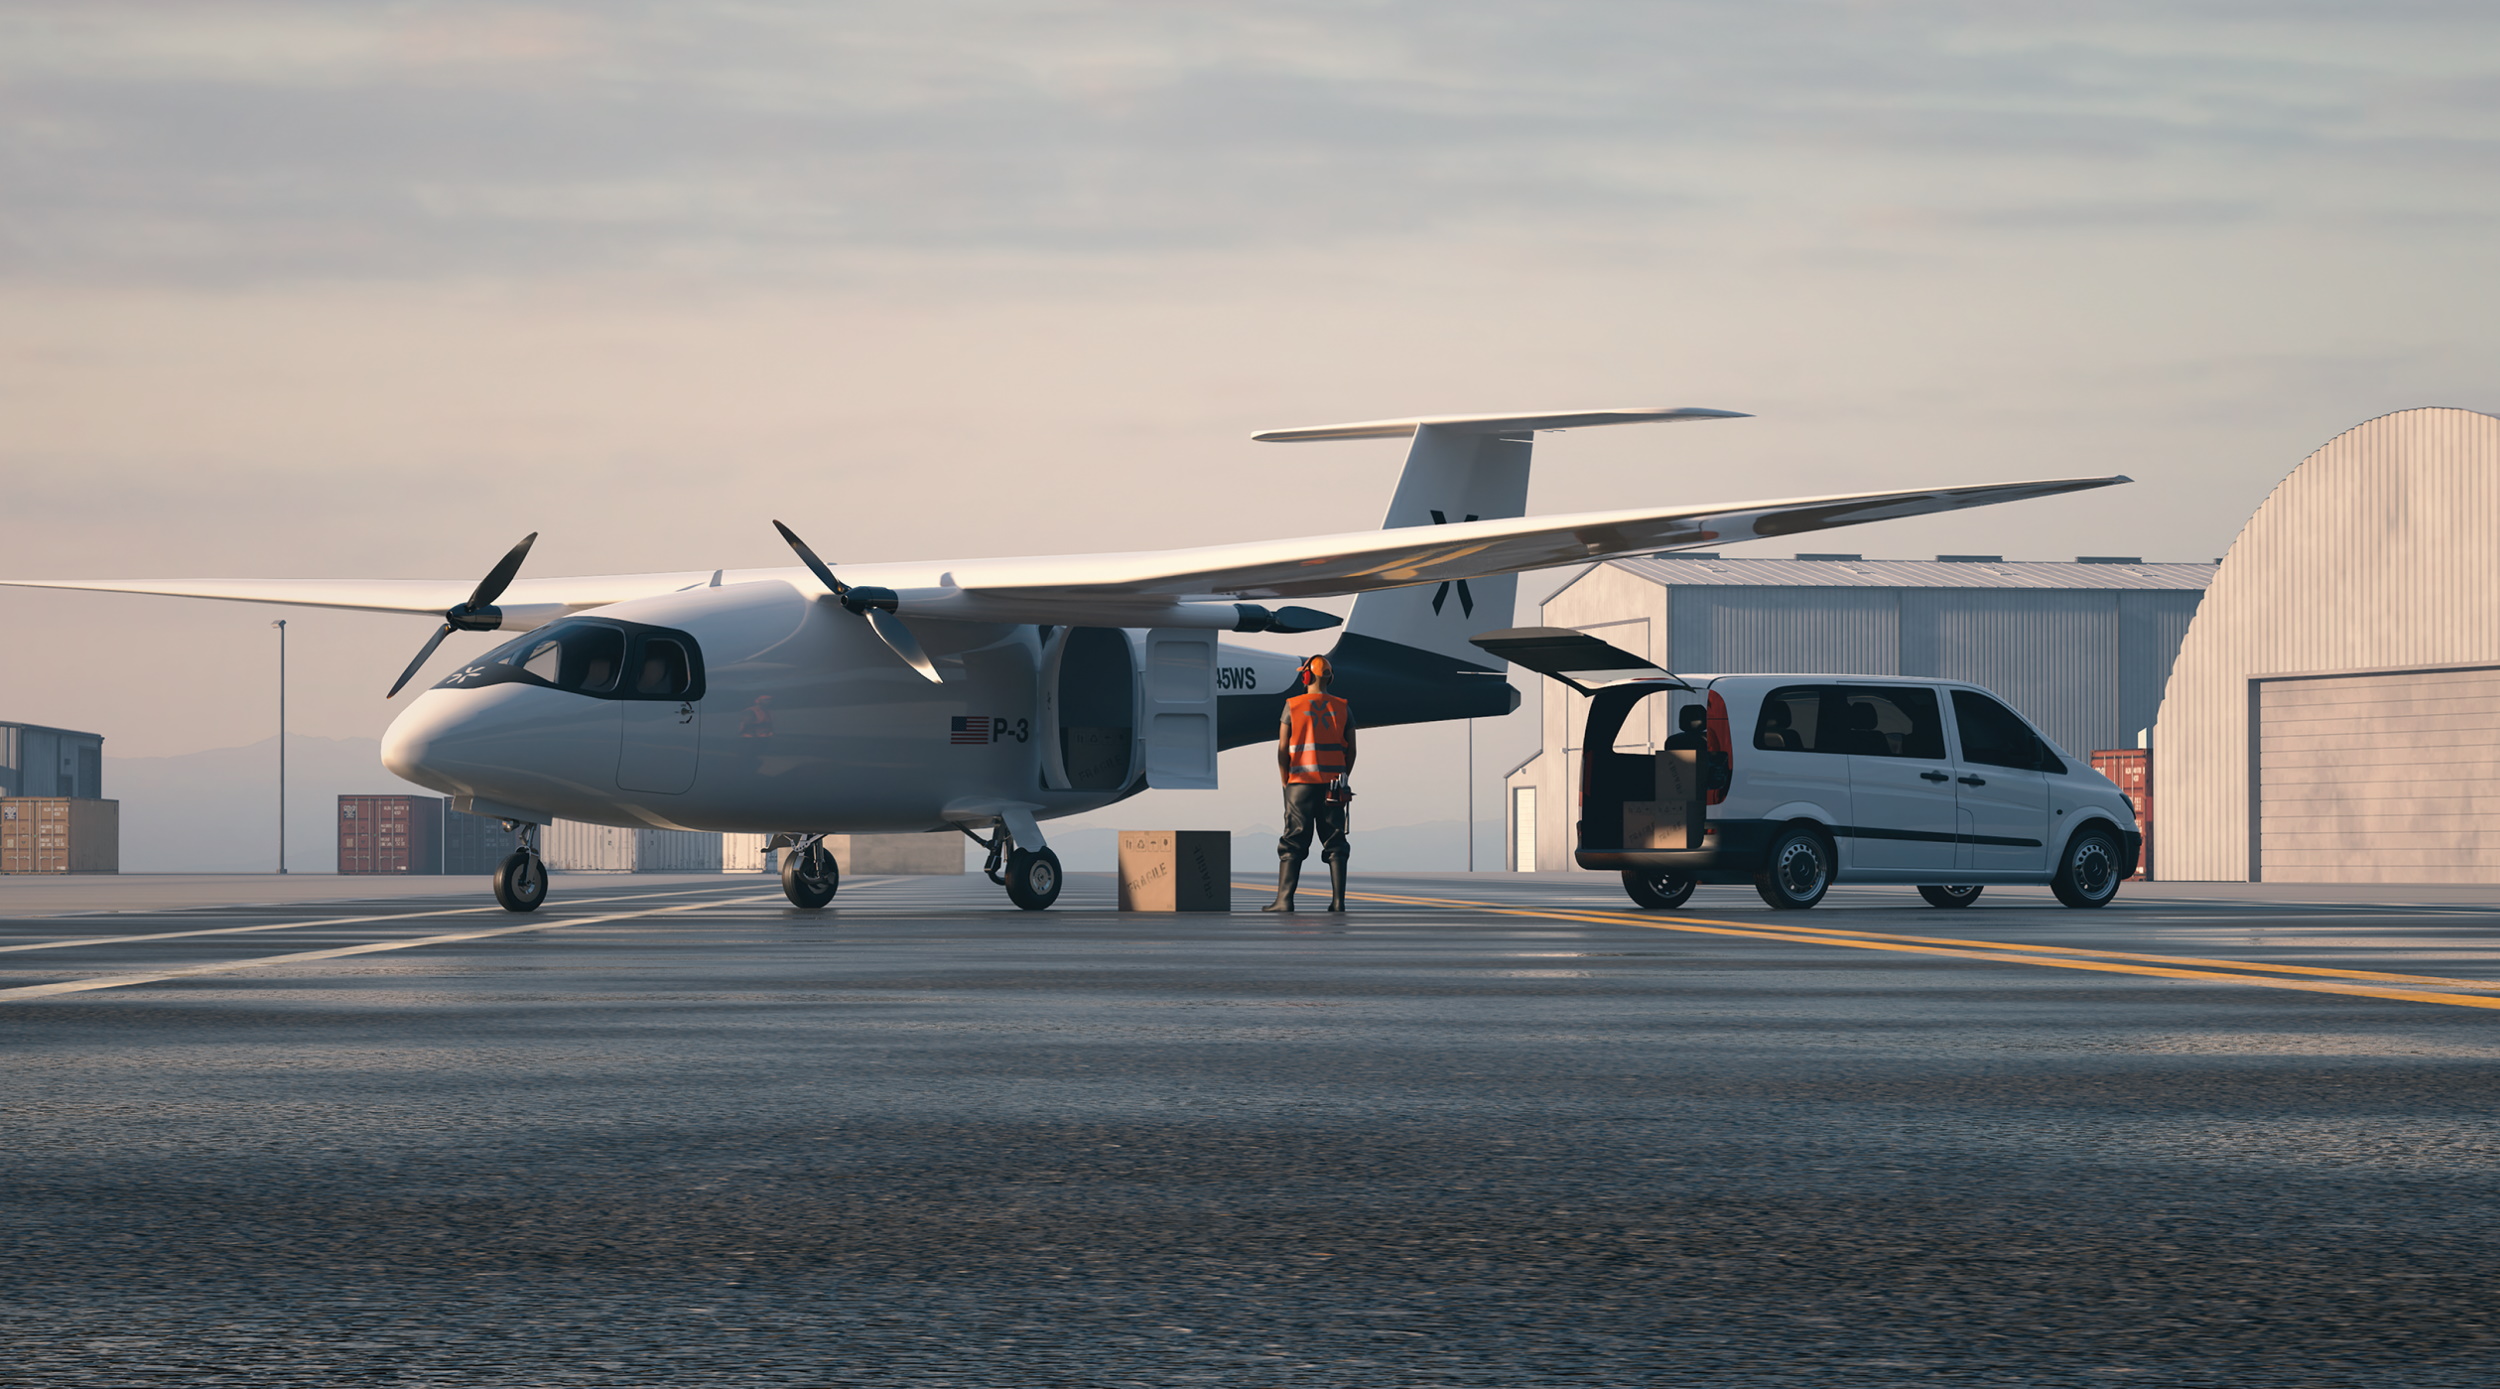 CG render of Pyka's P3 plane on a runway with people getting into it.